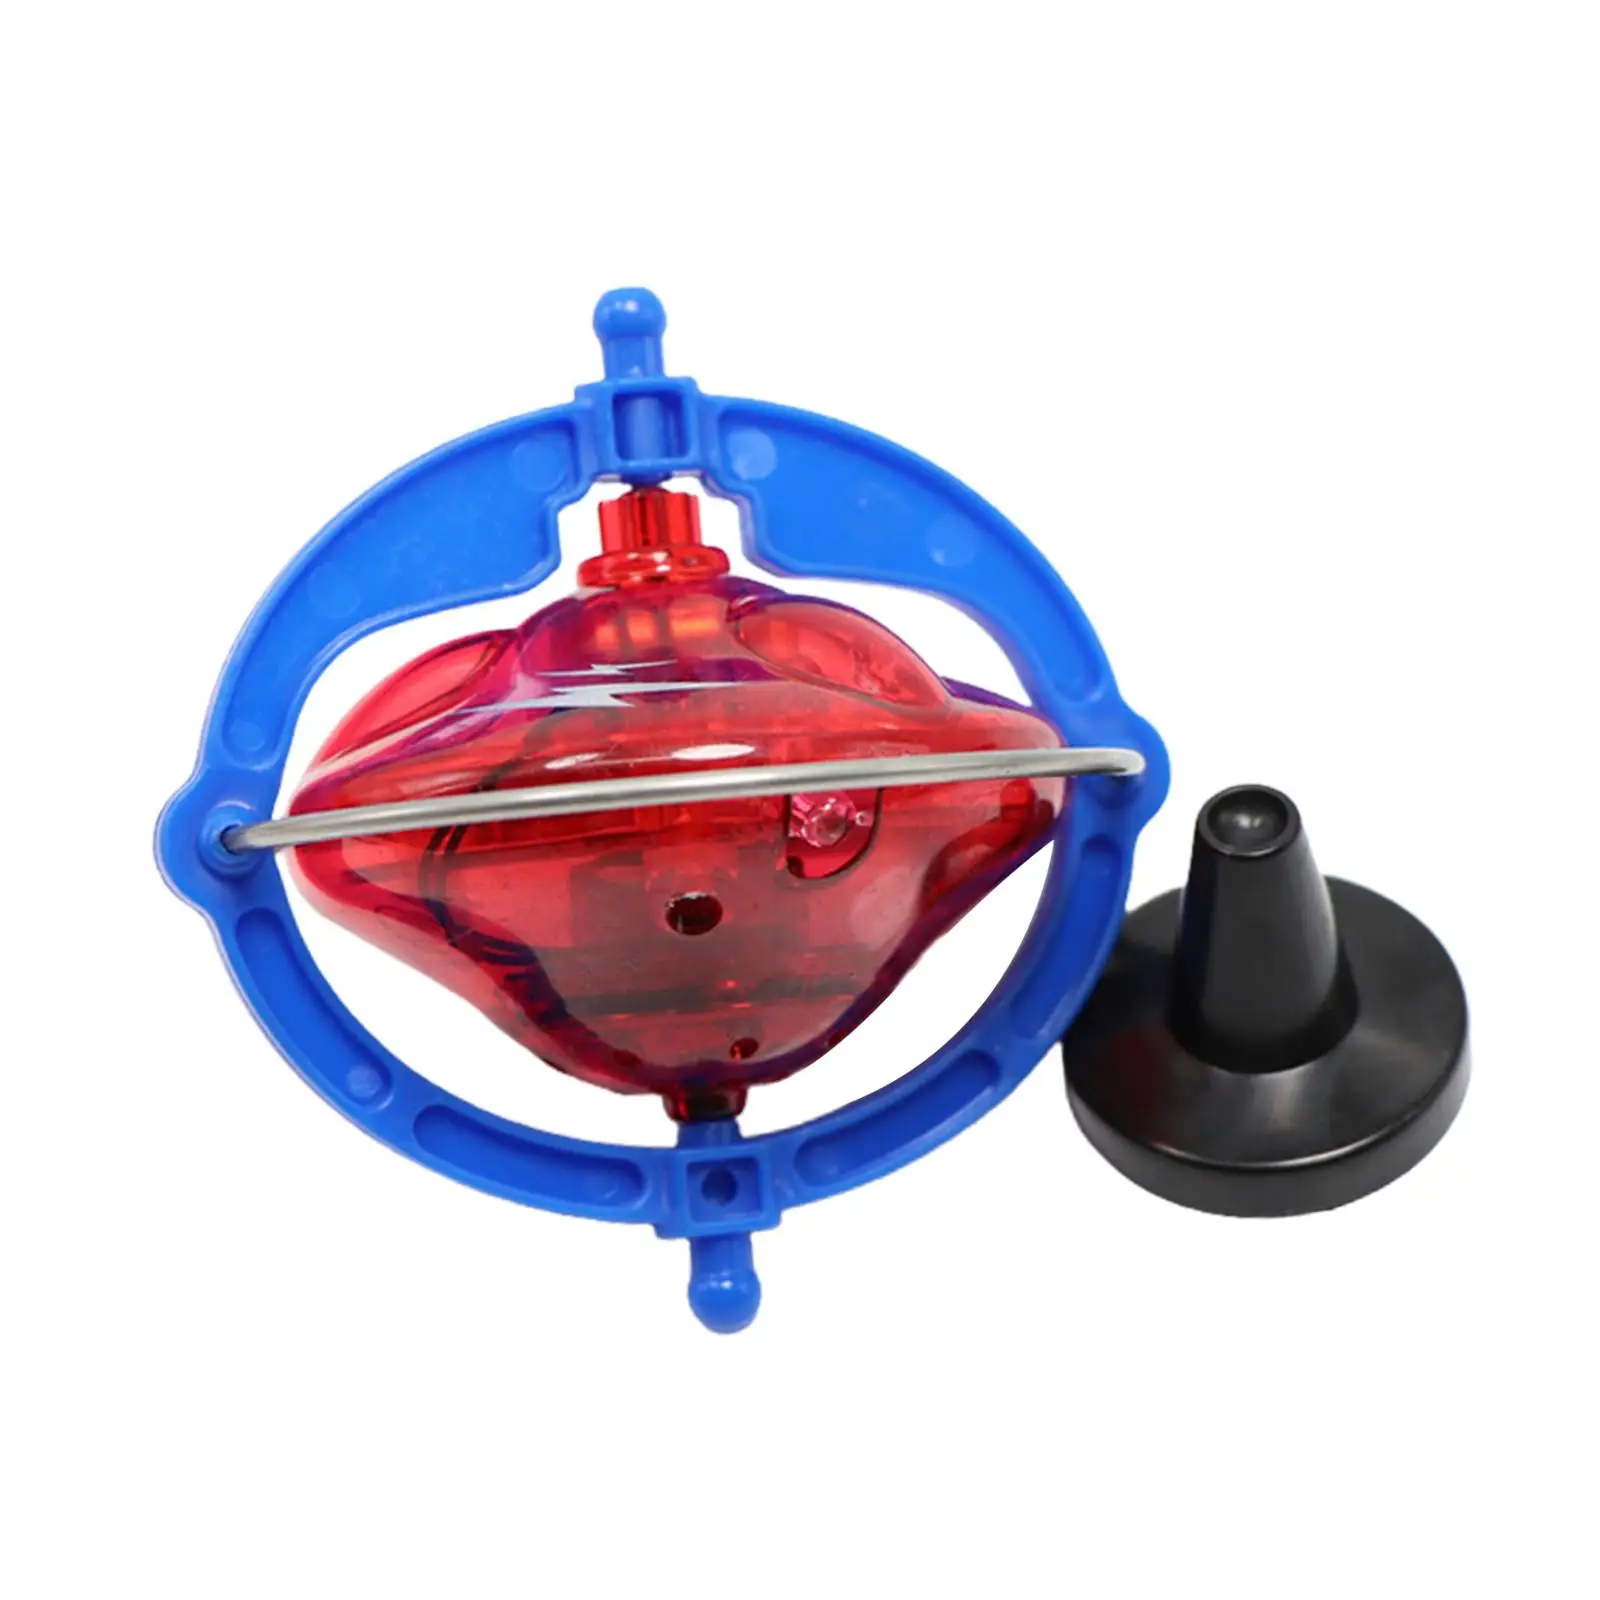 Musical Gyroscope Rotating Top Flashing Rotating Music Gyroscope with Music and Light Kids Toys Gyroscope Novelty for Birthday